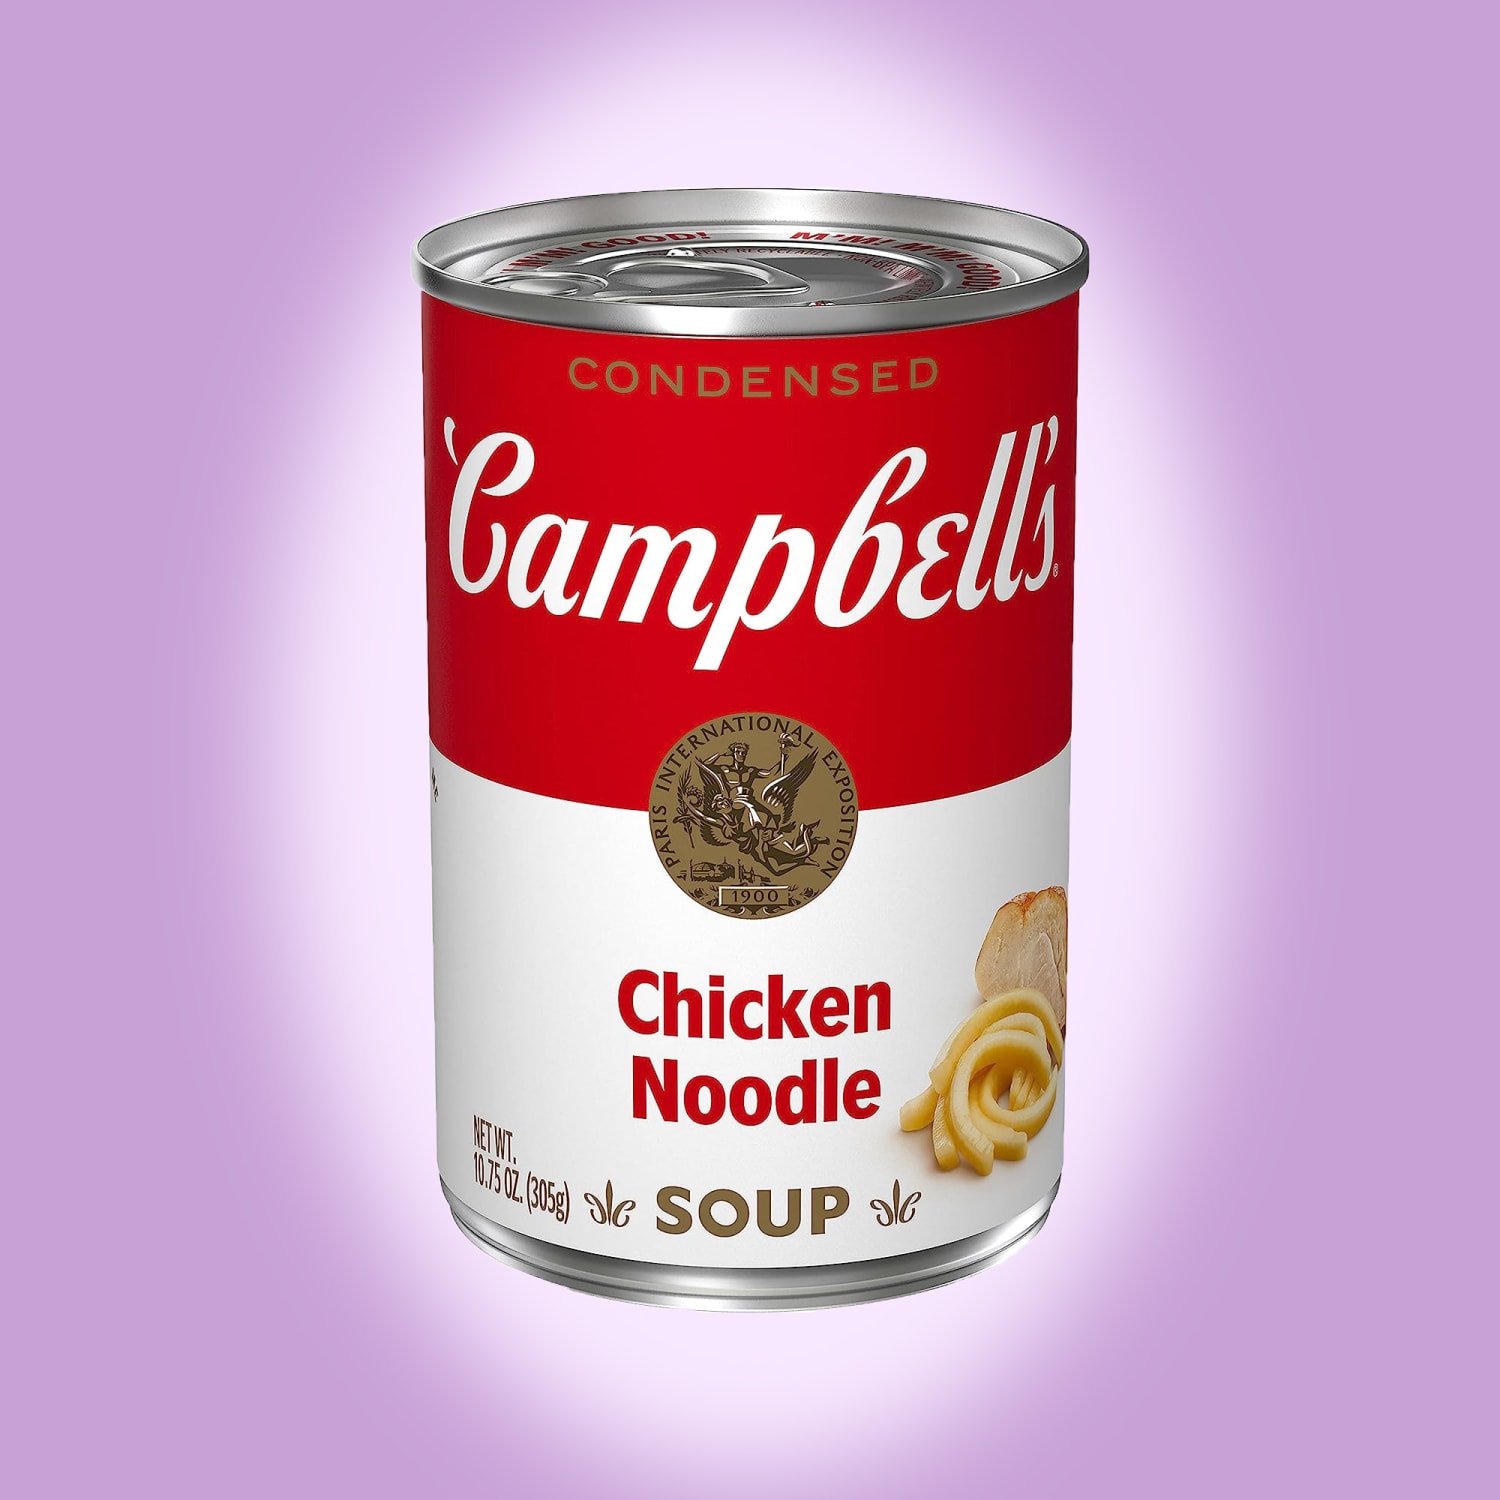 BEST Chicken Soup? Rao's, Kettle & Fire, Pacific Foods, Health Valley,  Annie's, Campbell's,Progresso 